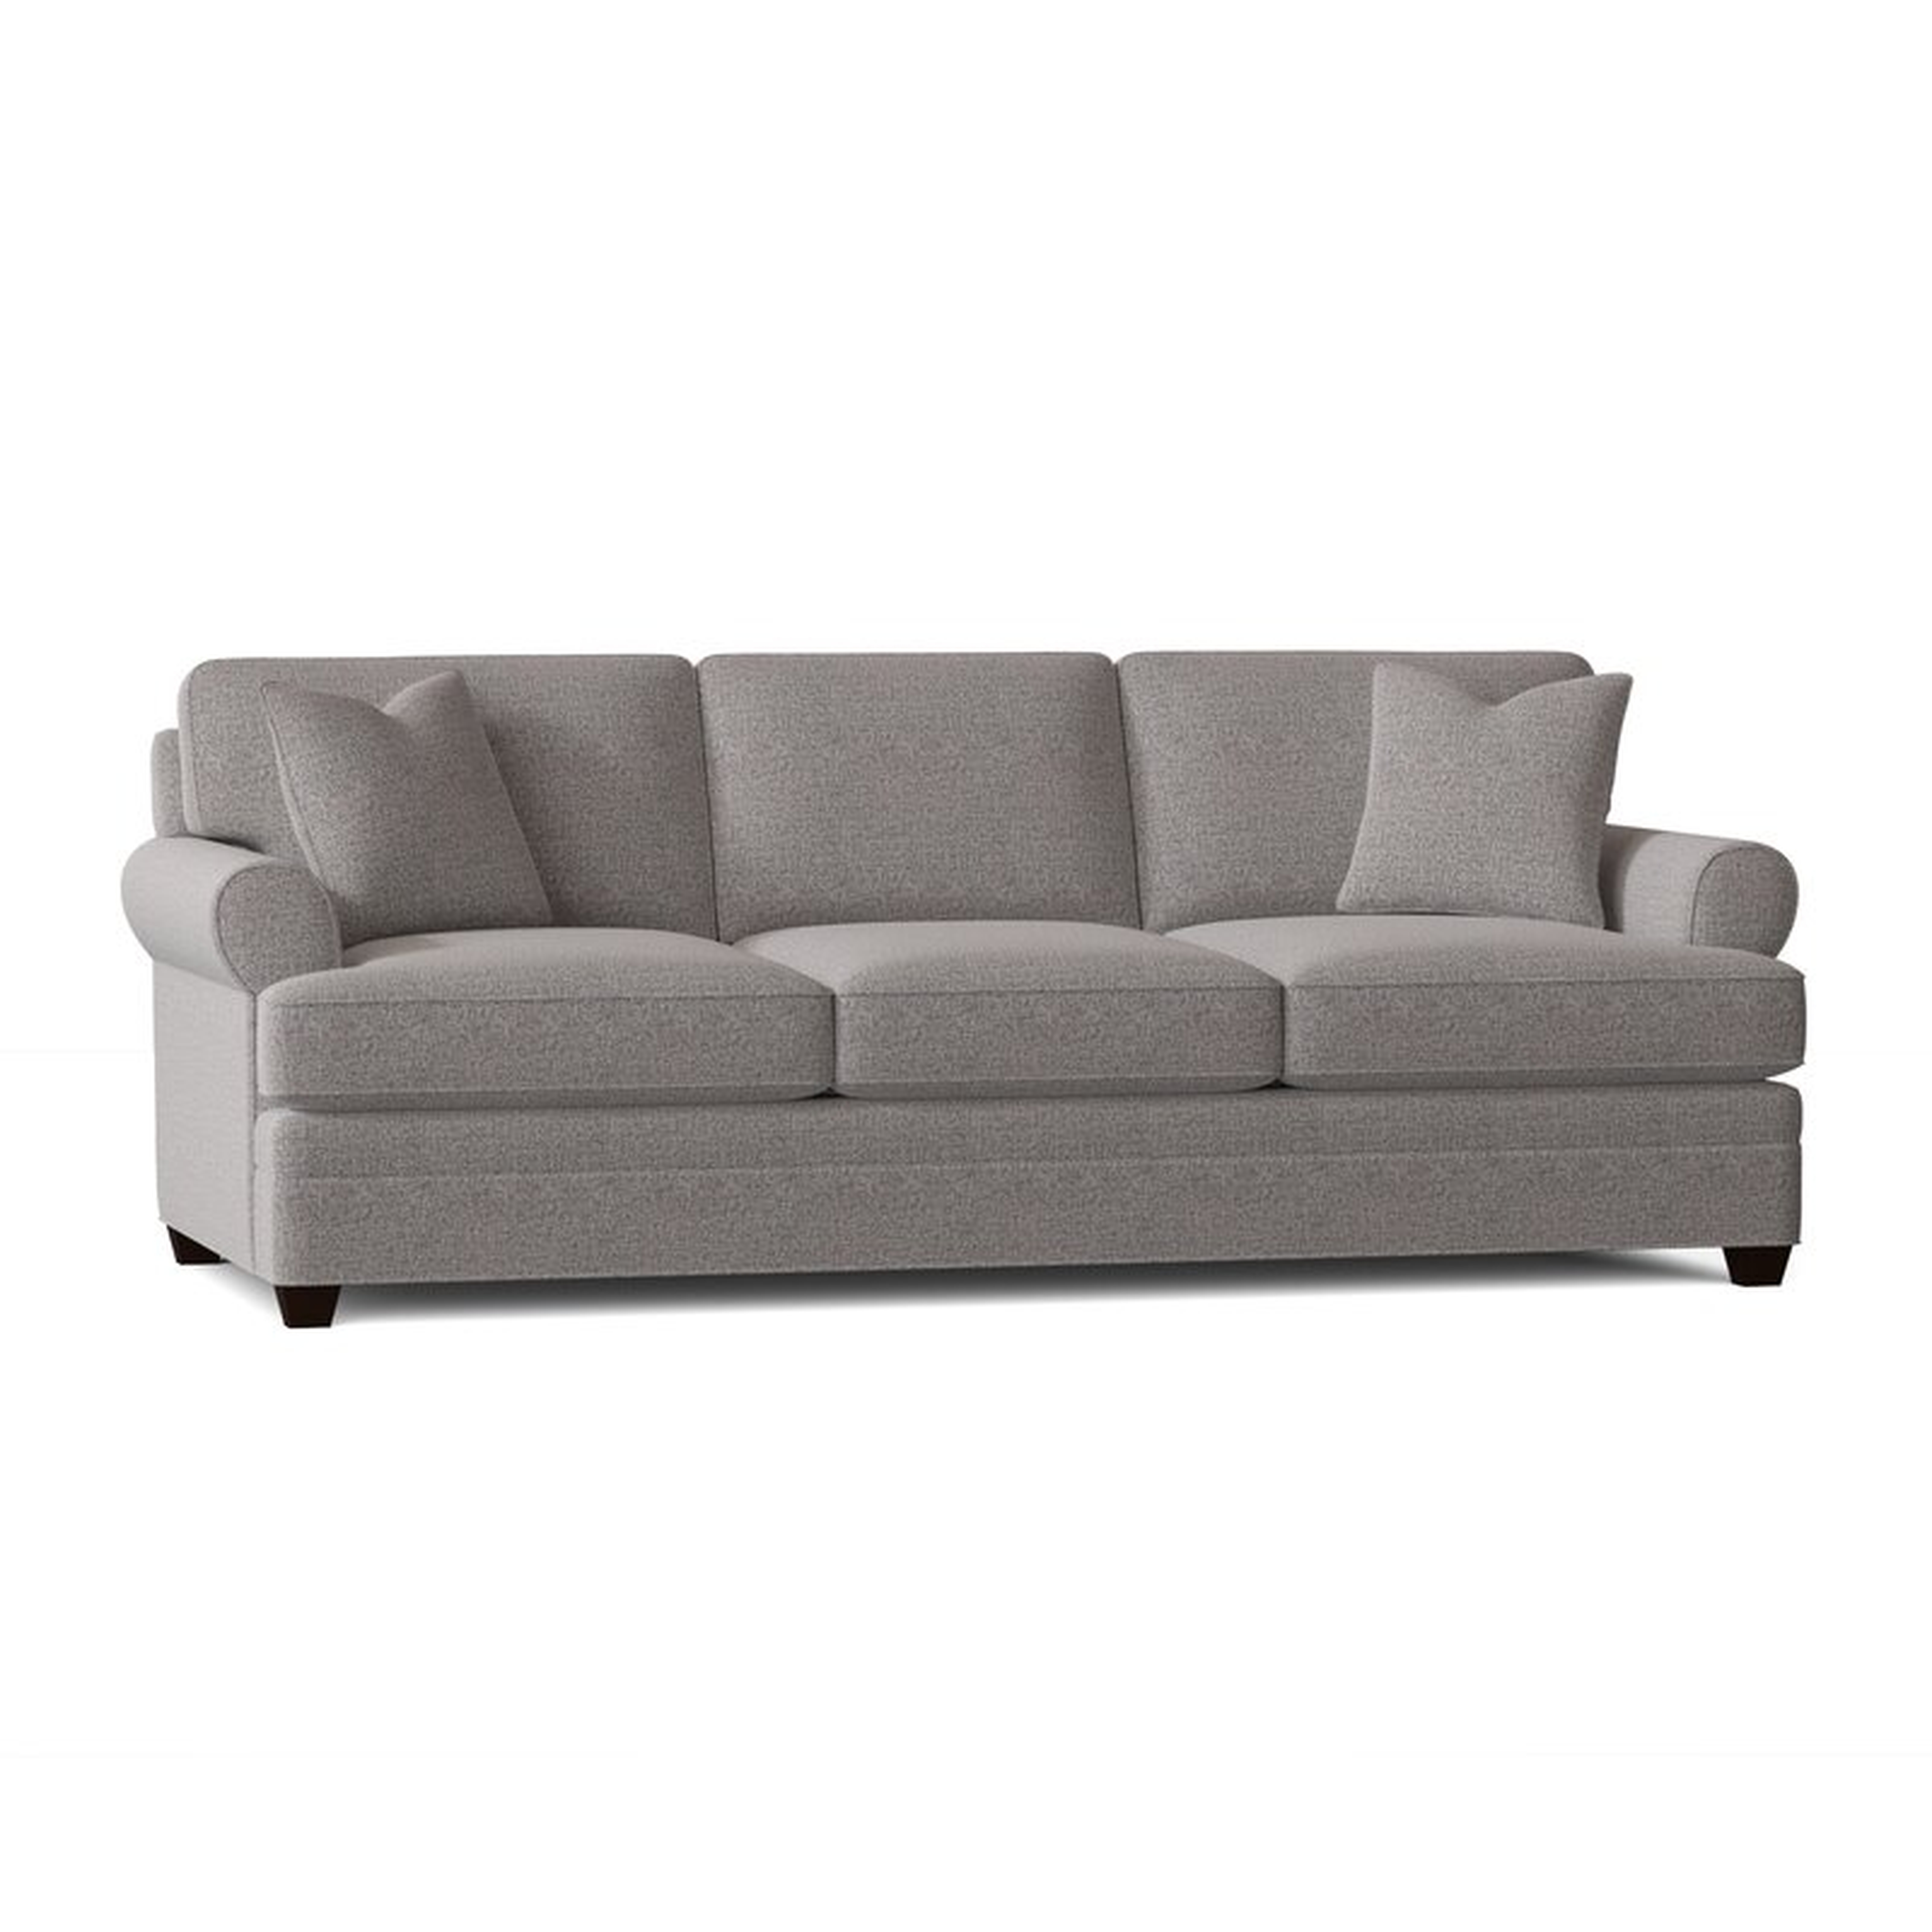 Living Your Way Rolled Arm Sofa - Birch Lane